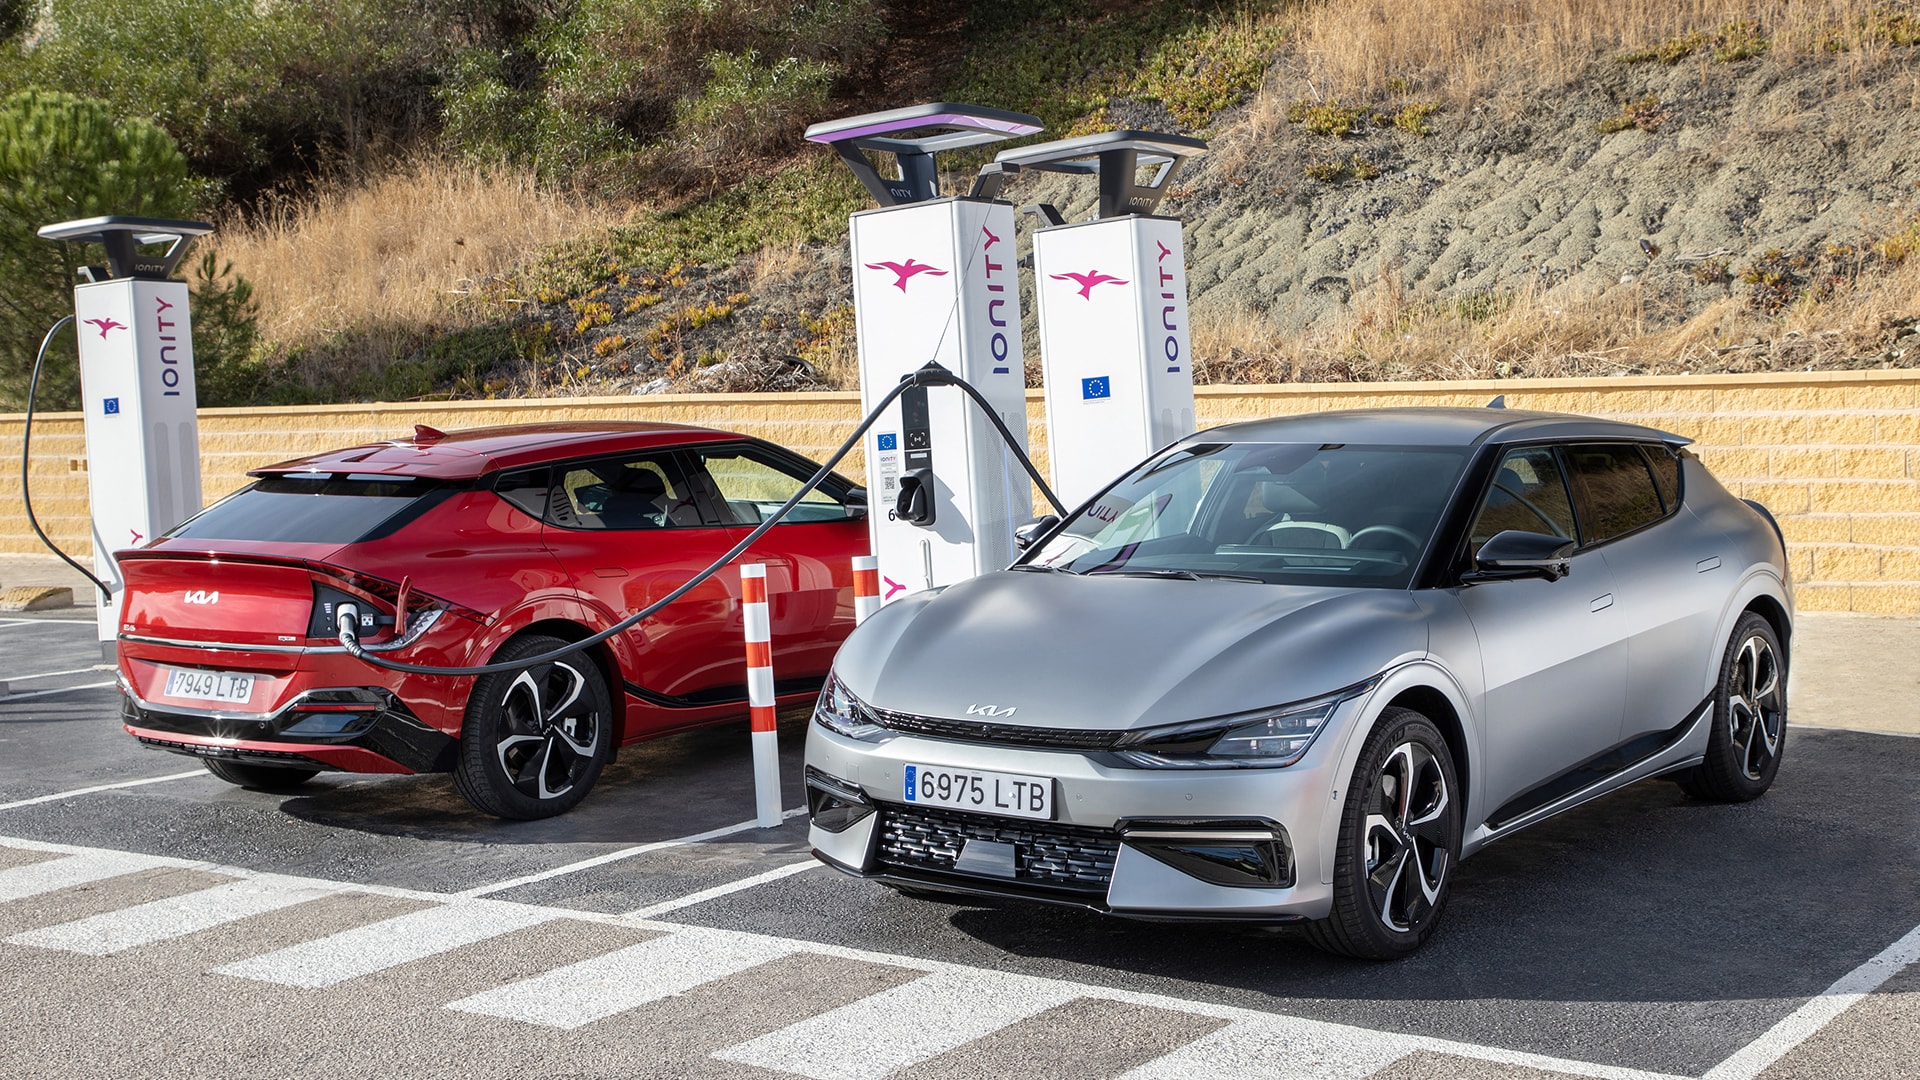 Electric cars: Supercharging tweak could fill batteries 90% in 10 mins